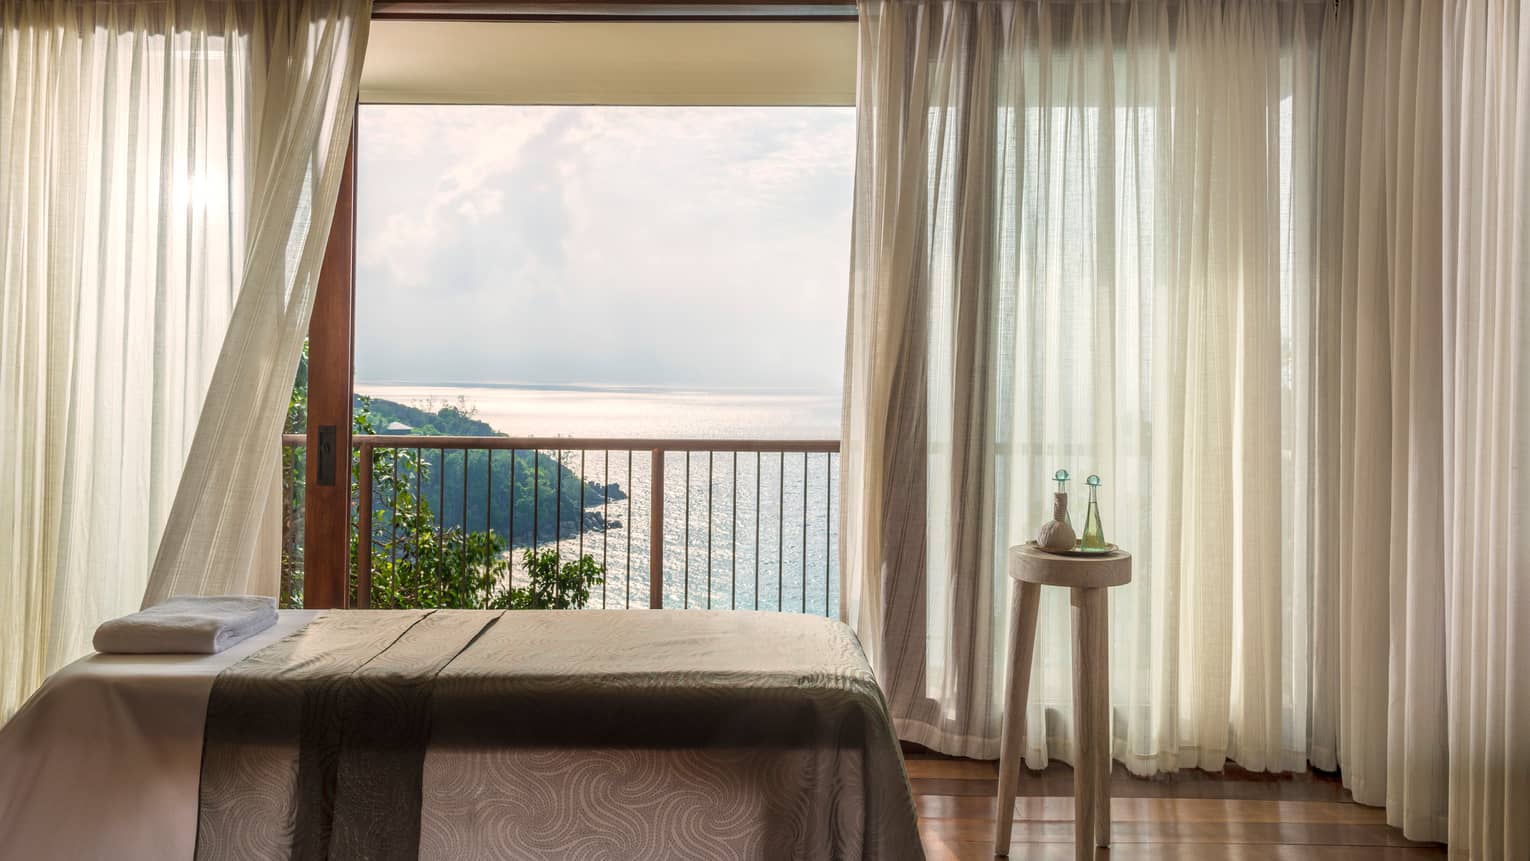 Massage bed in front of open window with long white curtains, ocean view 